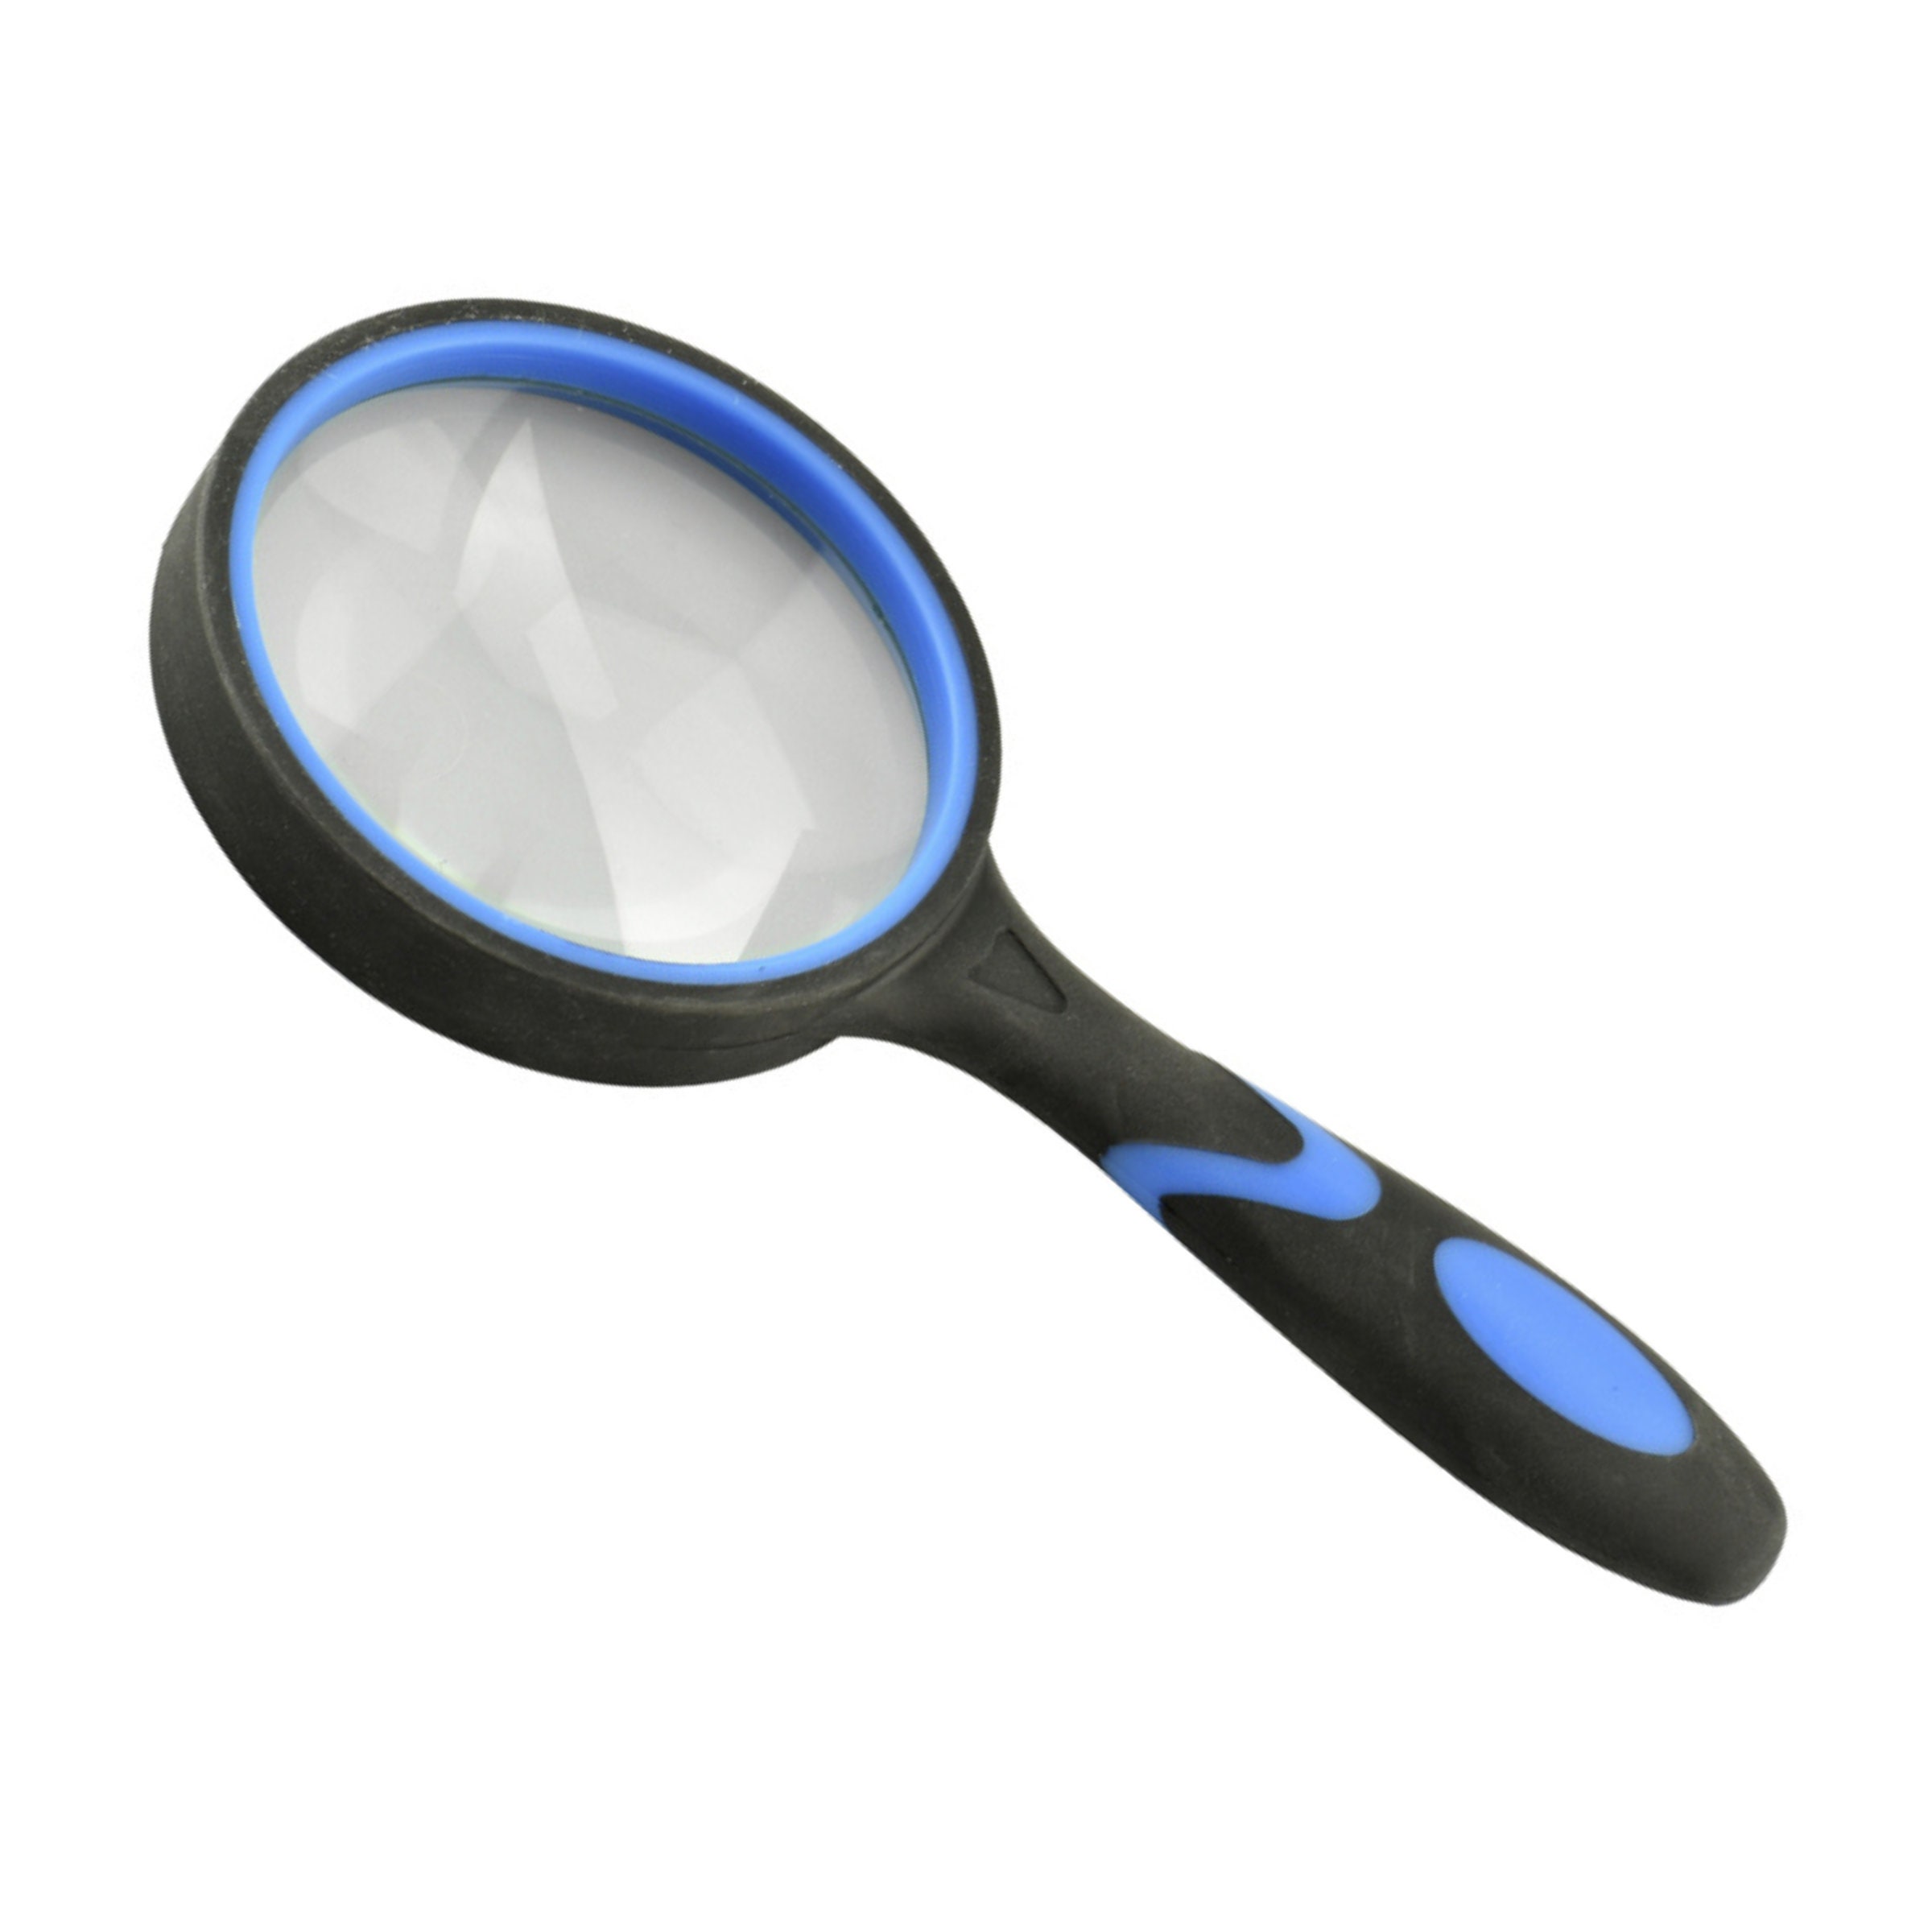 Dual Glass Lens Magnifying CLIP ON MAGNIFIER 3.3x 5x 16.5x